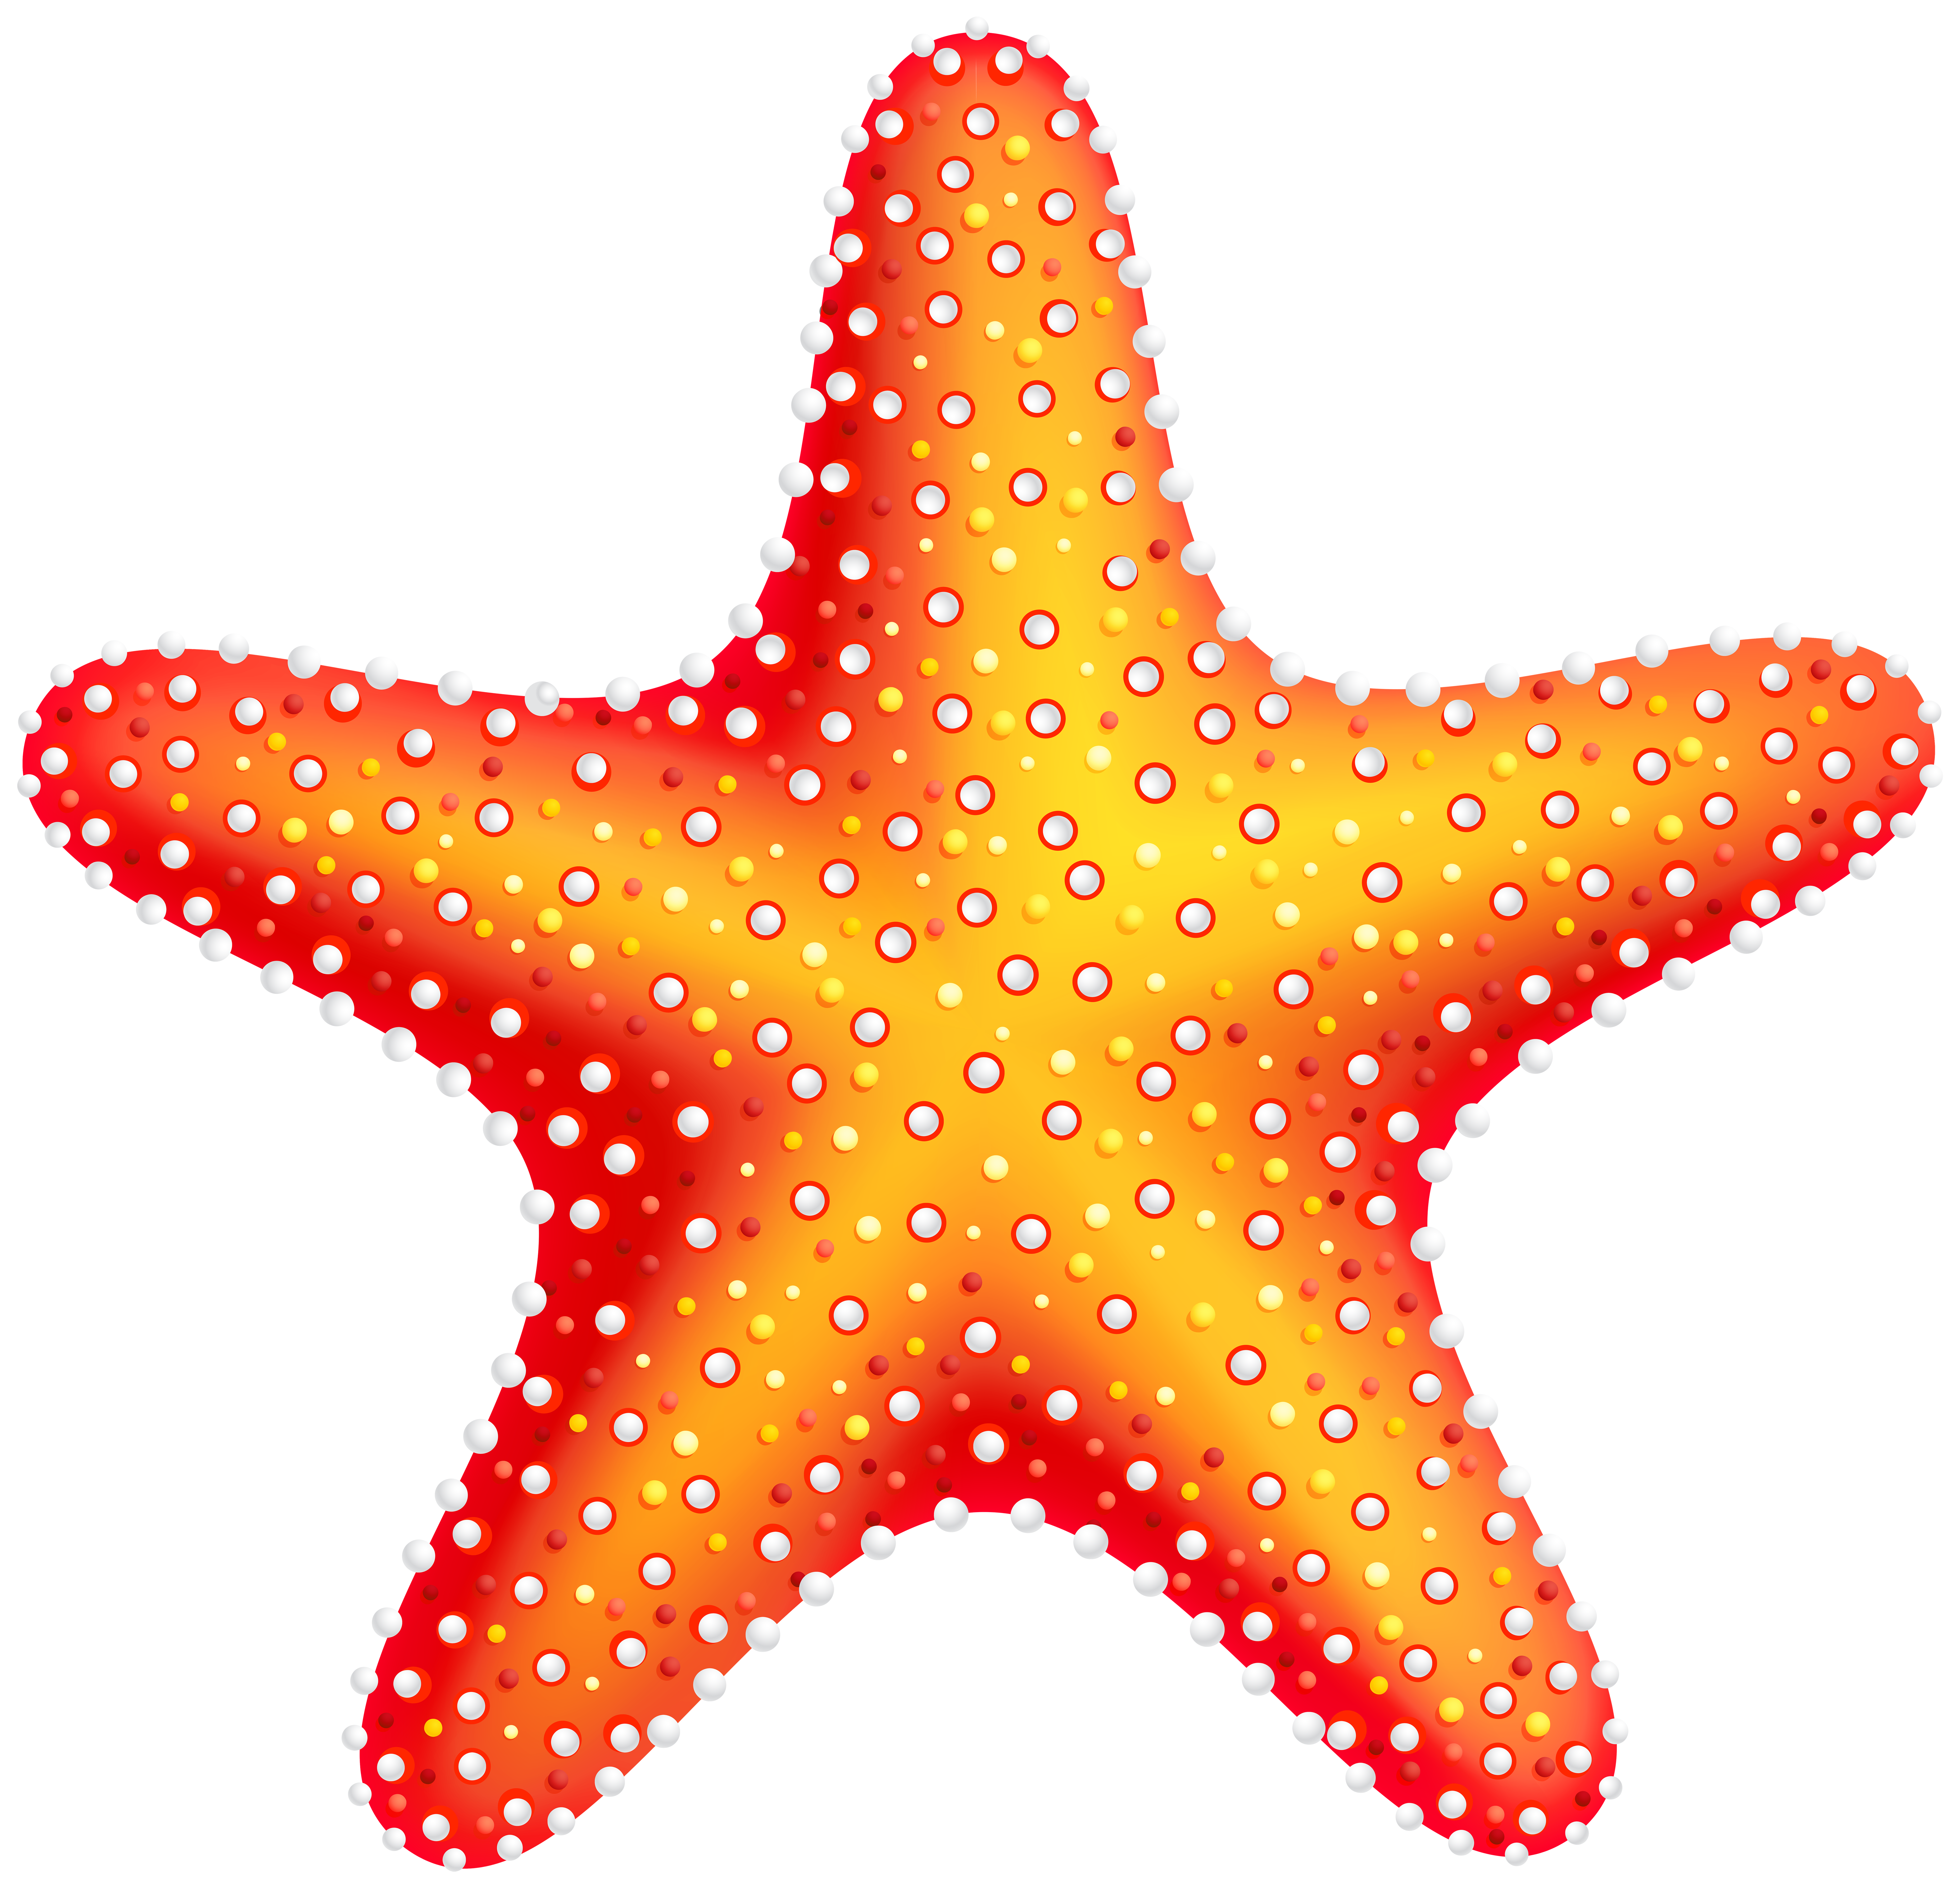 Clipart images of starfish